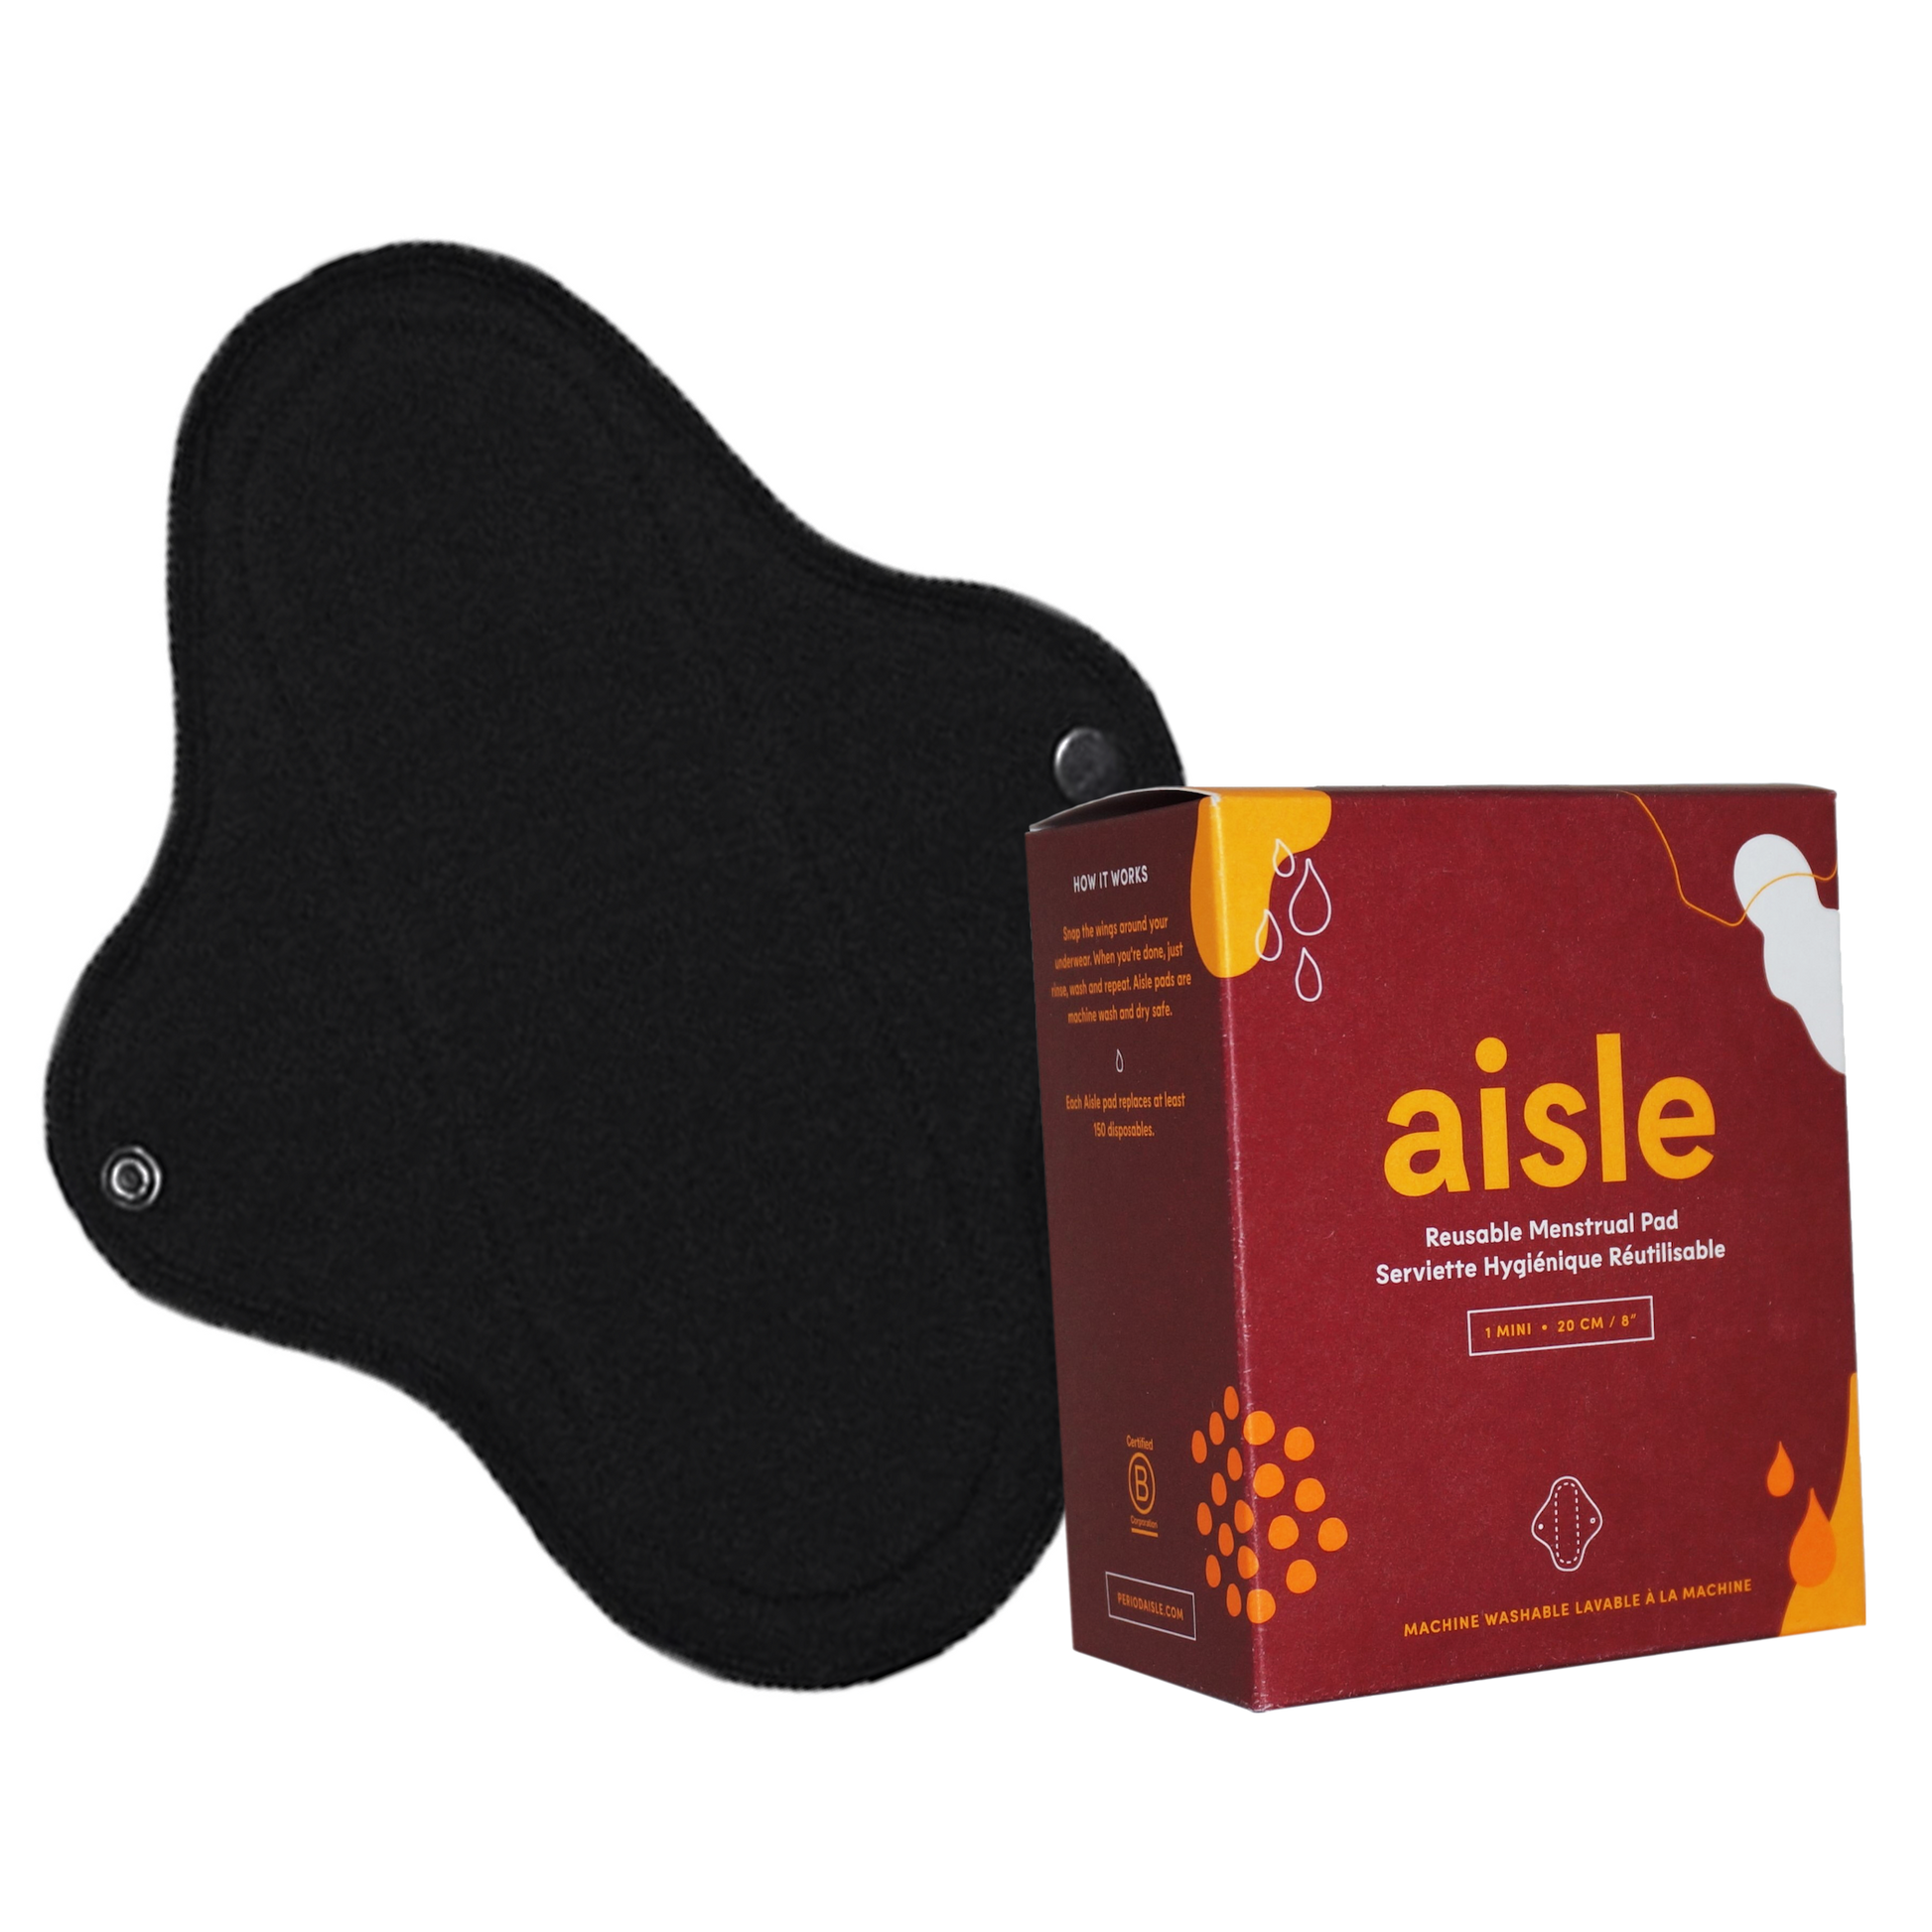 Aisle reusable cloth pad size Mini packaging with one black pad